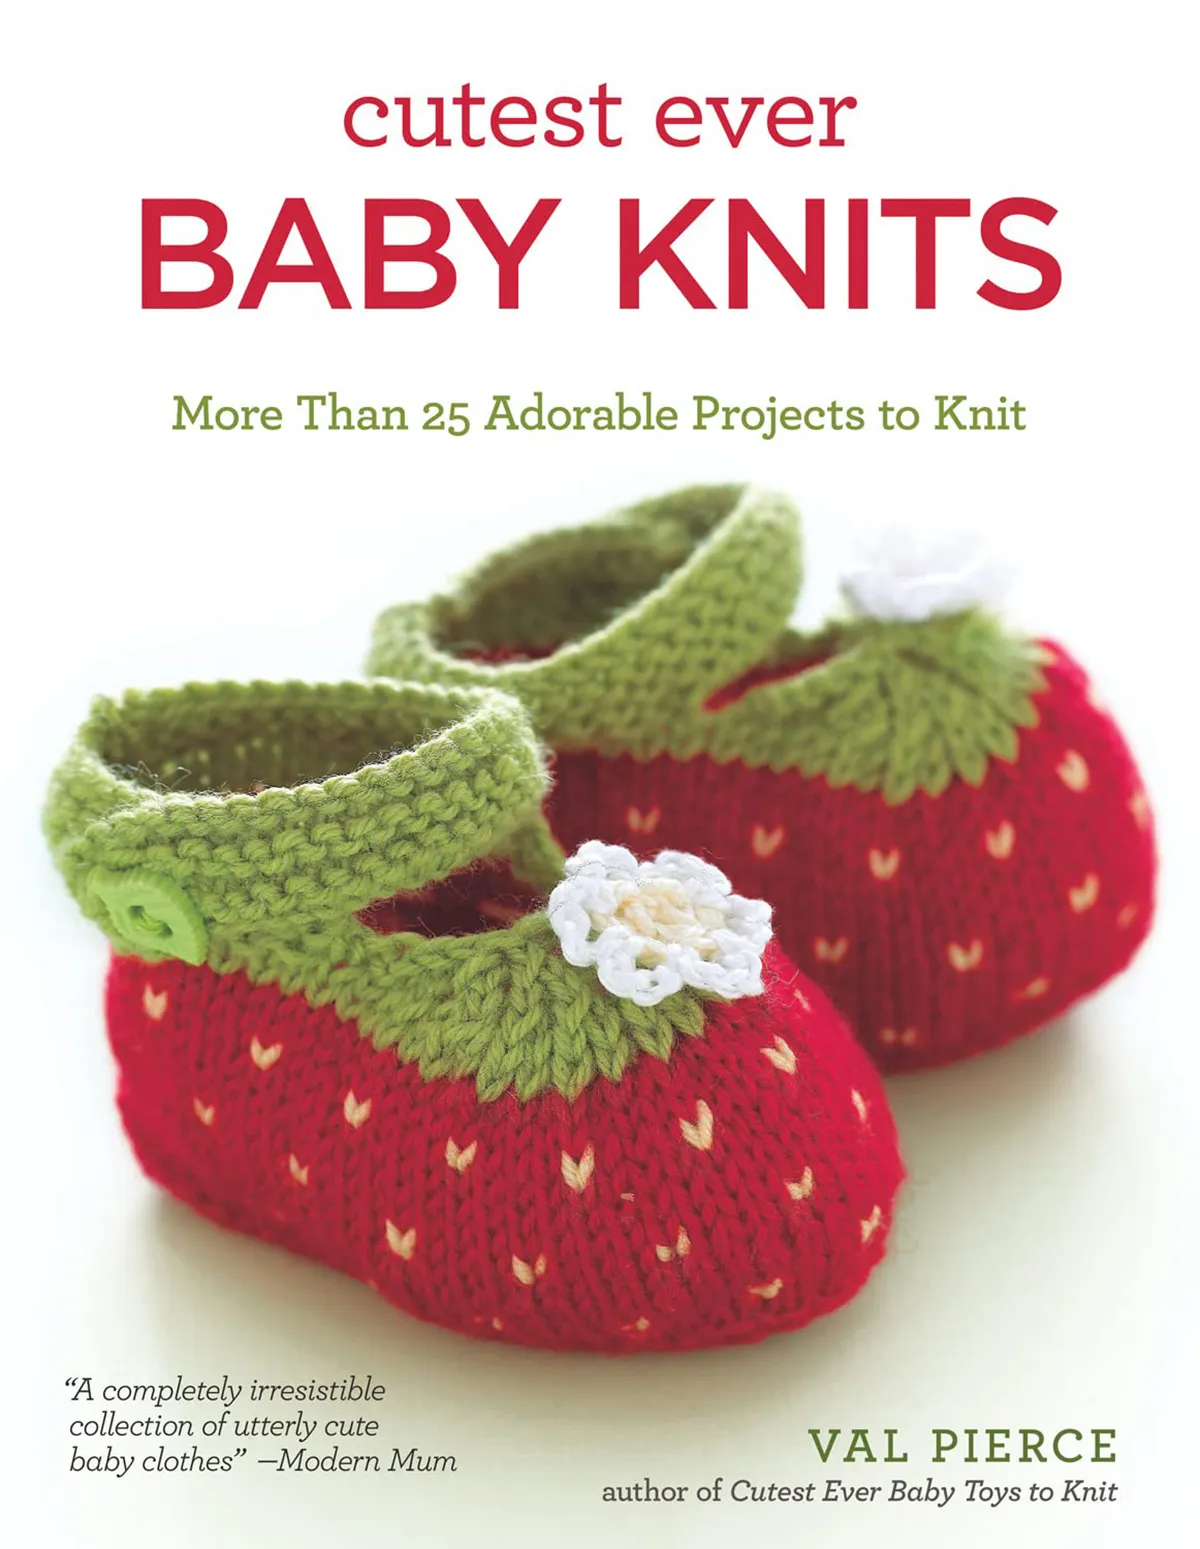 Cutest ever baby knits book